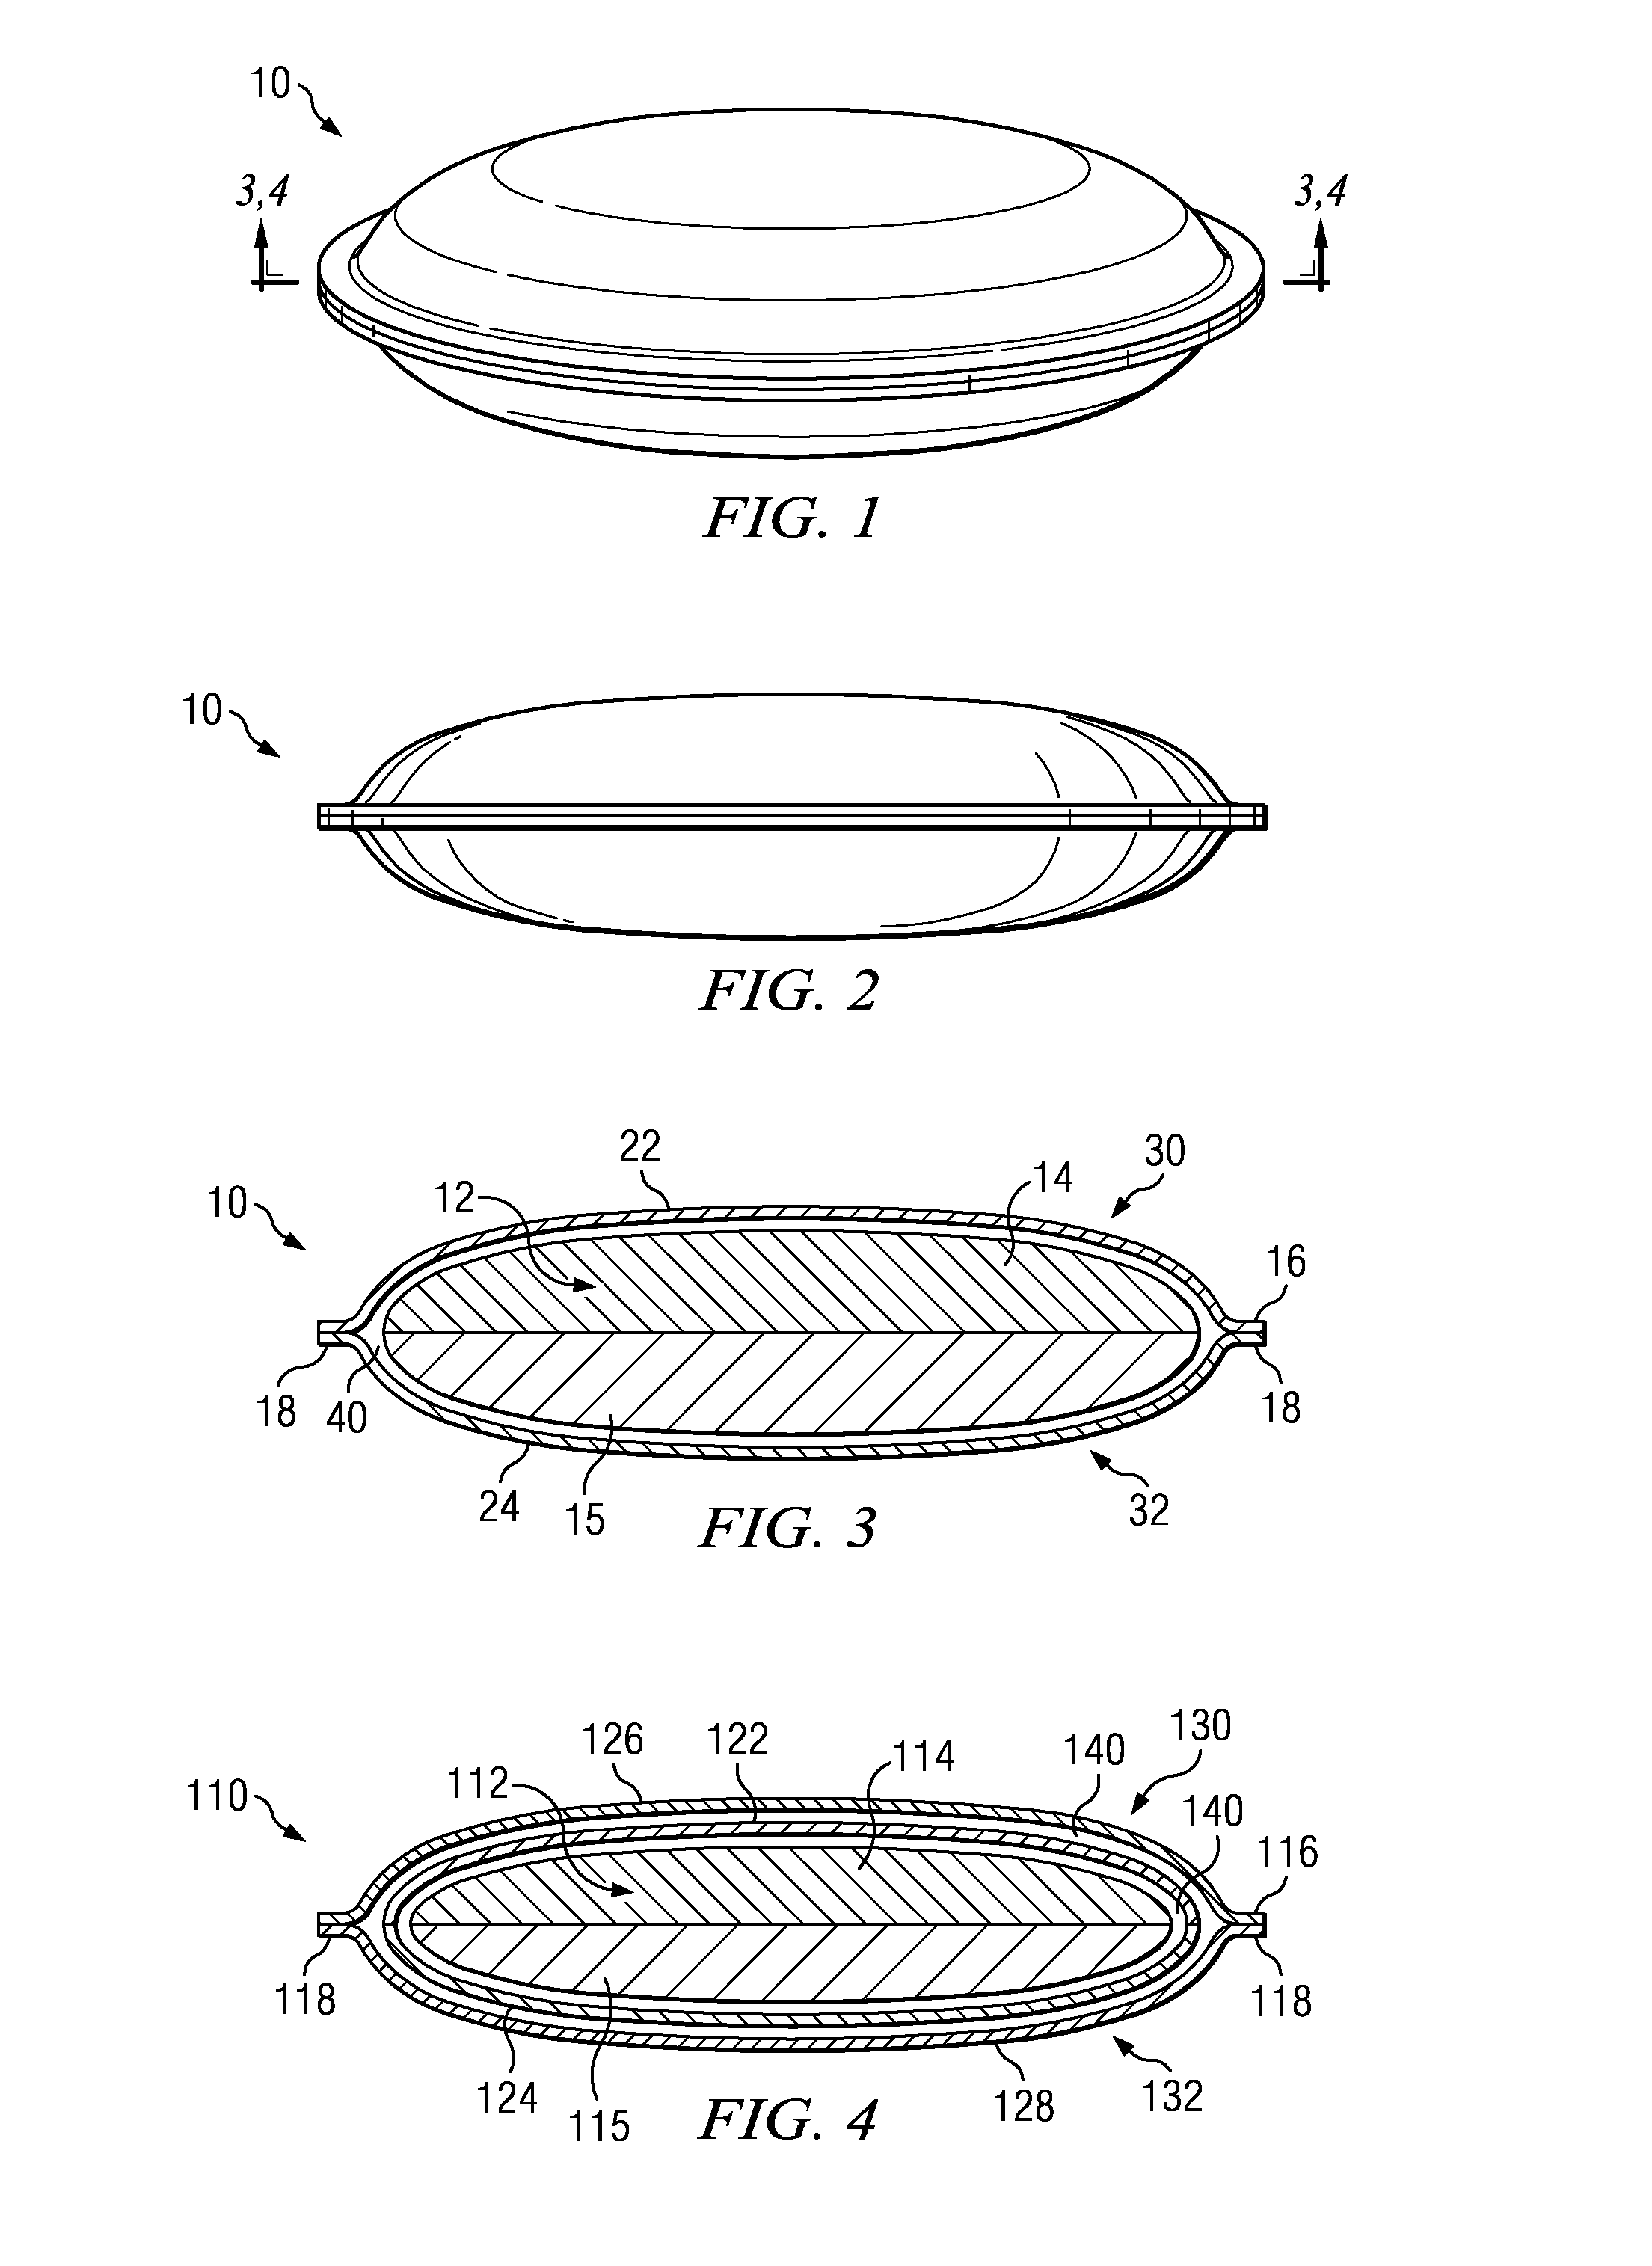 Personal Care Articles Having Multi-Zone Compliant Personal Care Compositions